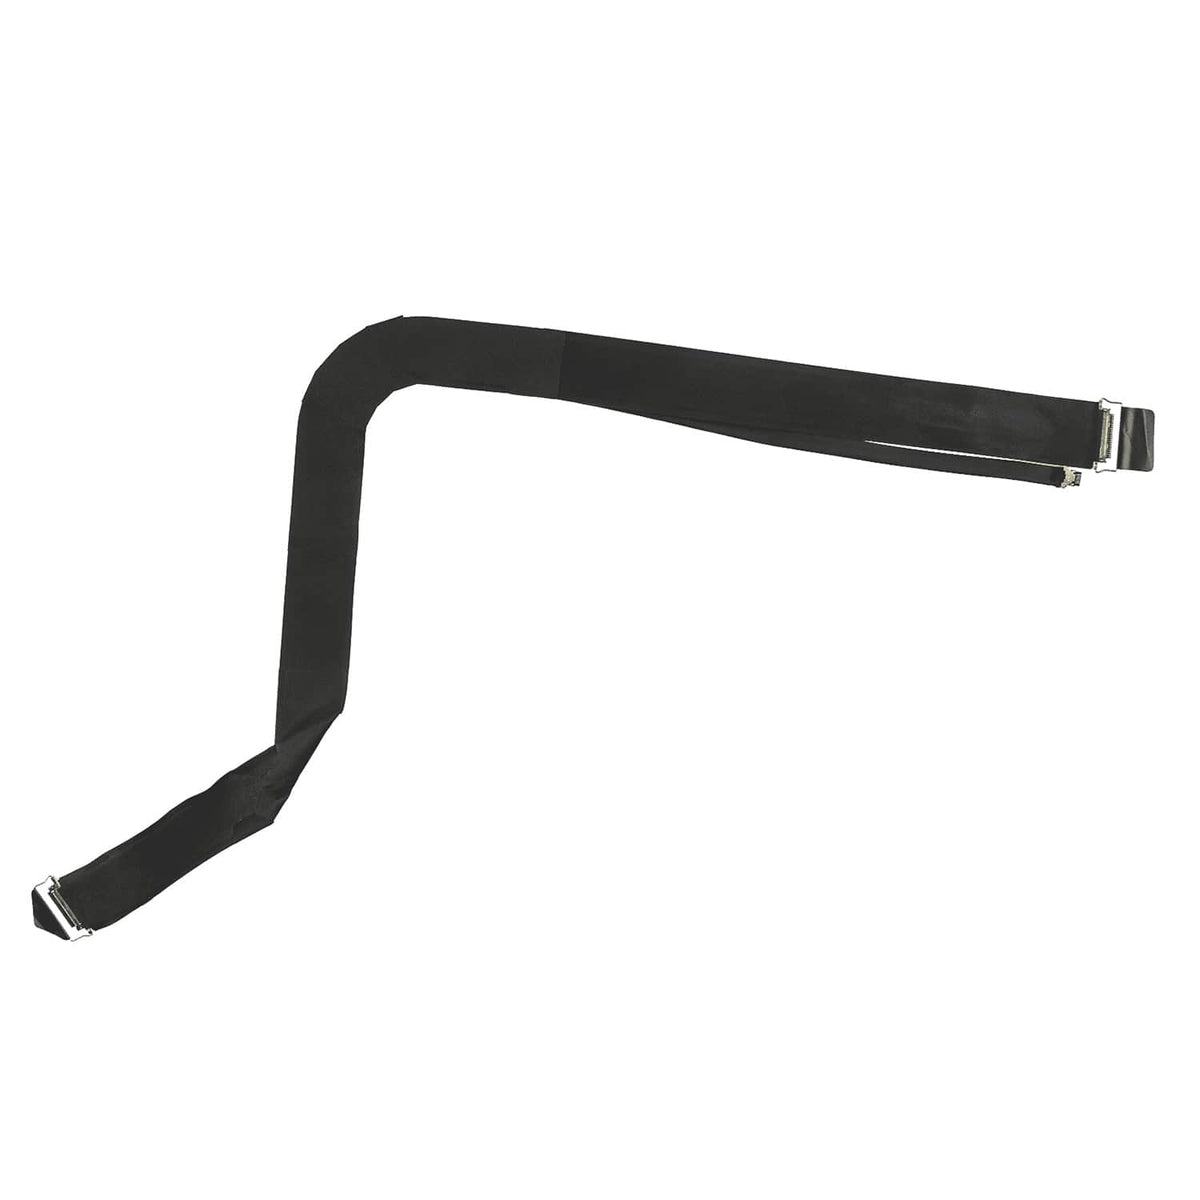 CAMERA & MICROPHONE CABLE FOR IMAC 27" A1419 (LATE 2014, LATE 2015)